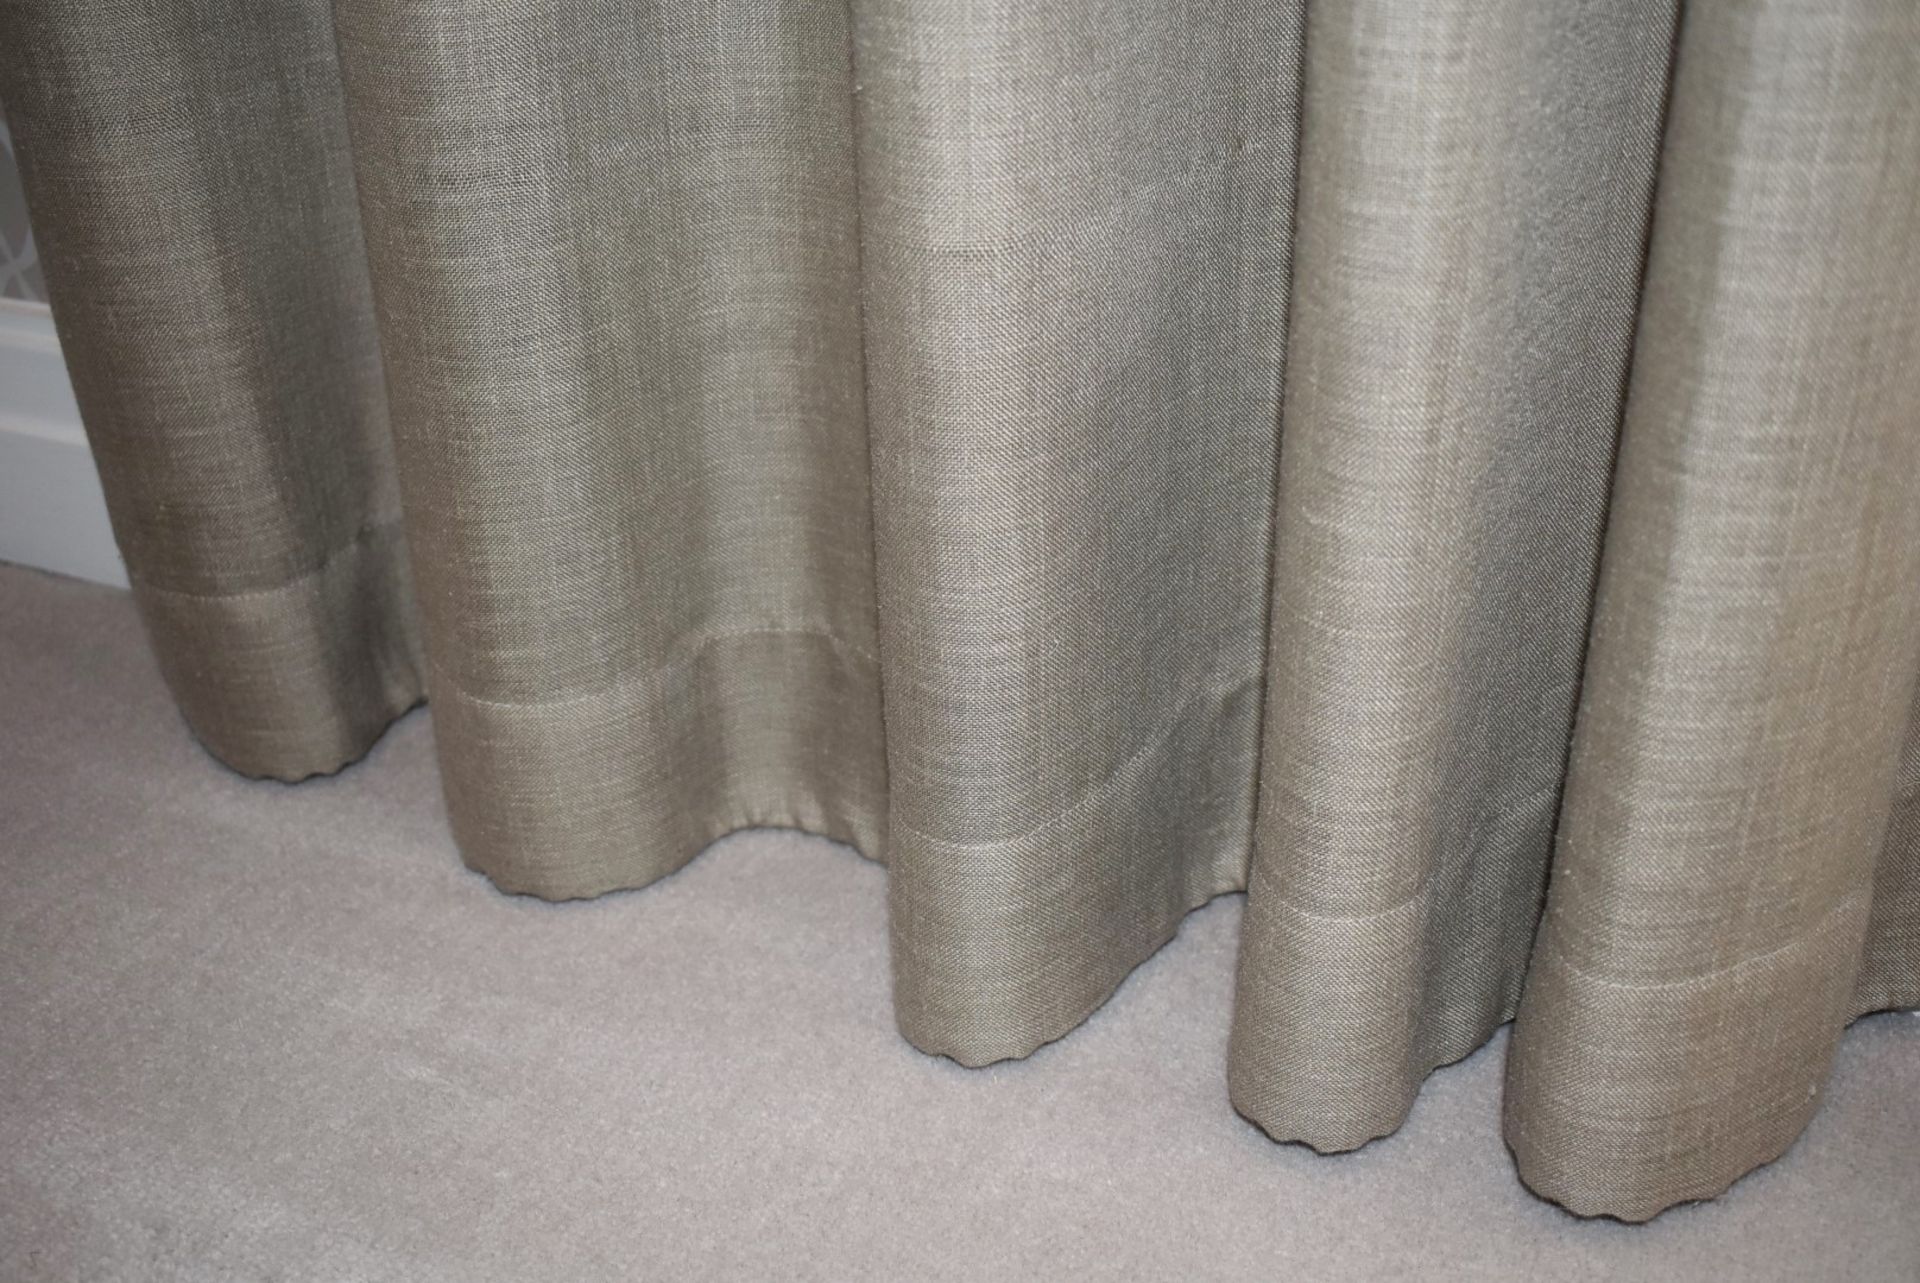 Pair Of DESIGNERS GUILD Elegant Silk Sheer Curtains In A Neutral Tone - Ref: RR09 / LNG - CL781 - - Image 3 of 5